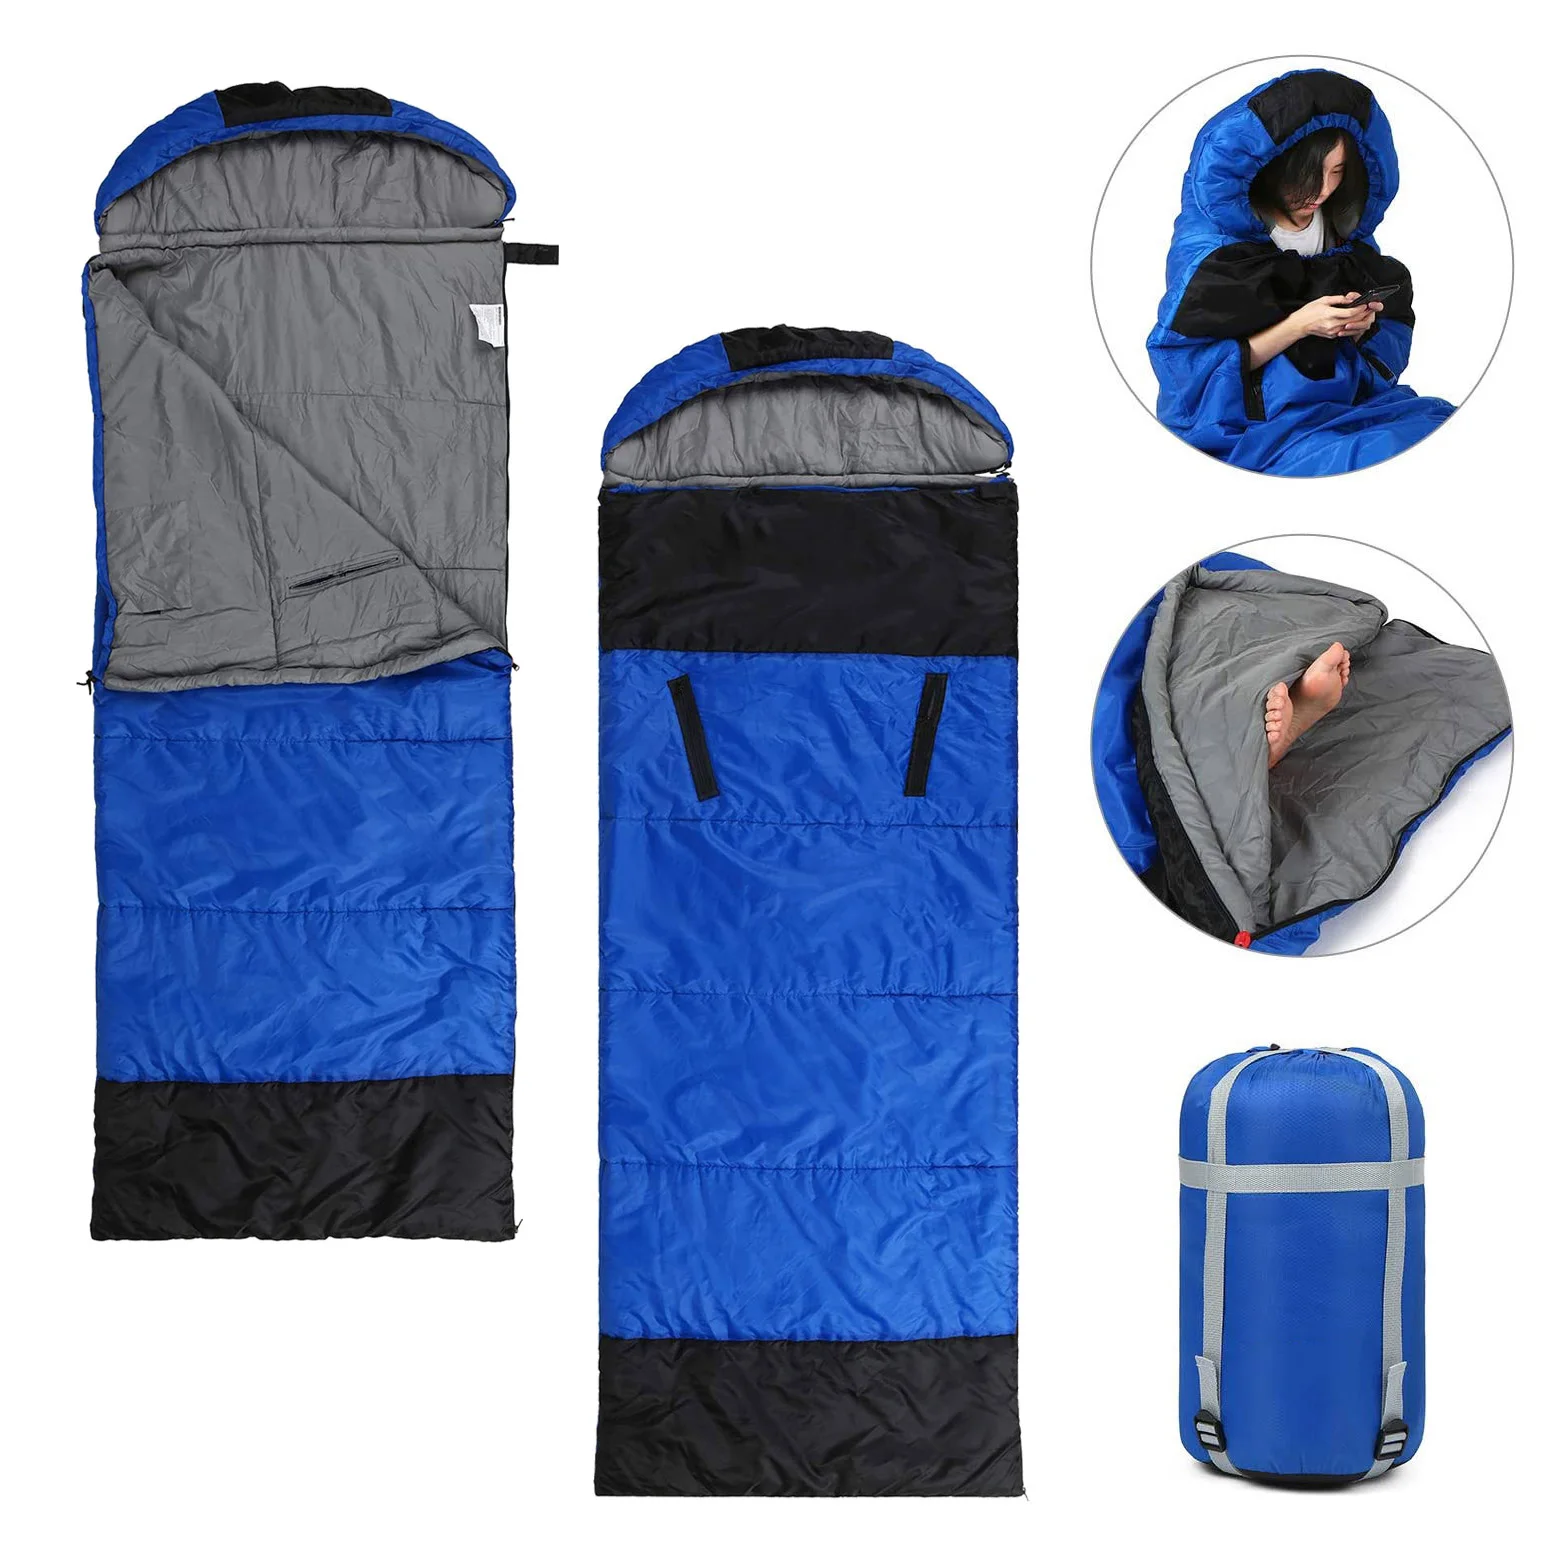 

Outdoor portable personal sports water-resistent fabric lightweight wide warm hand free capped envelope nature hike sleeping bag, Customized color